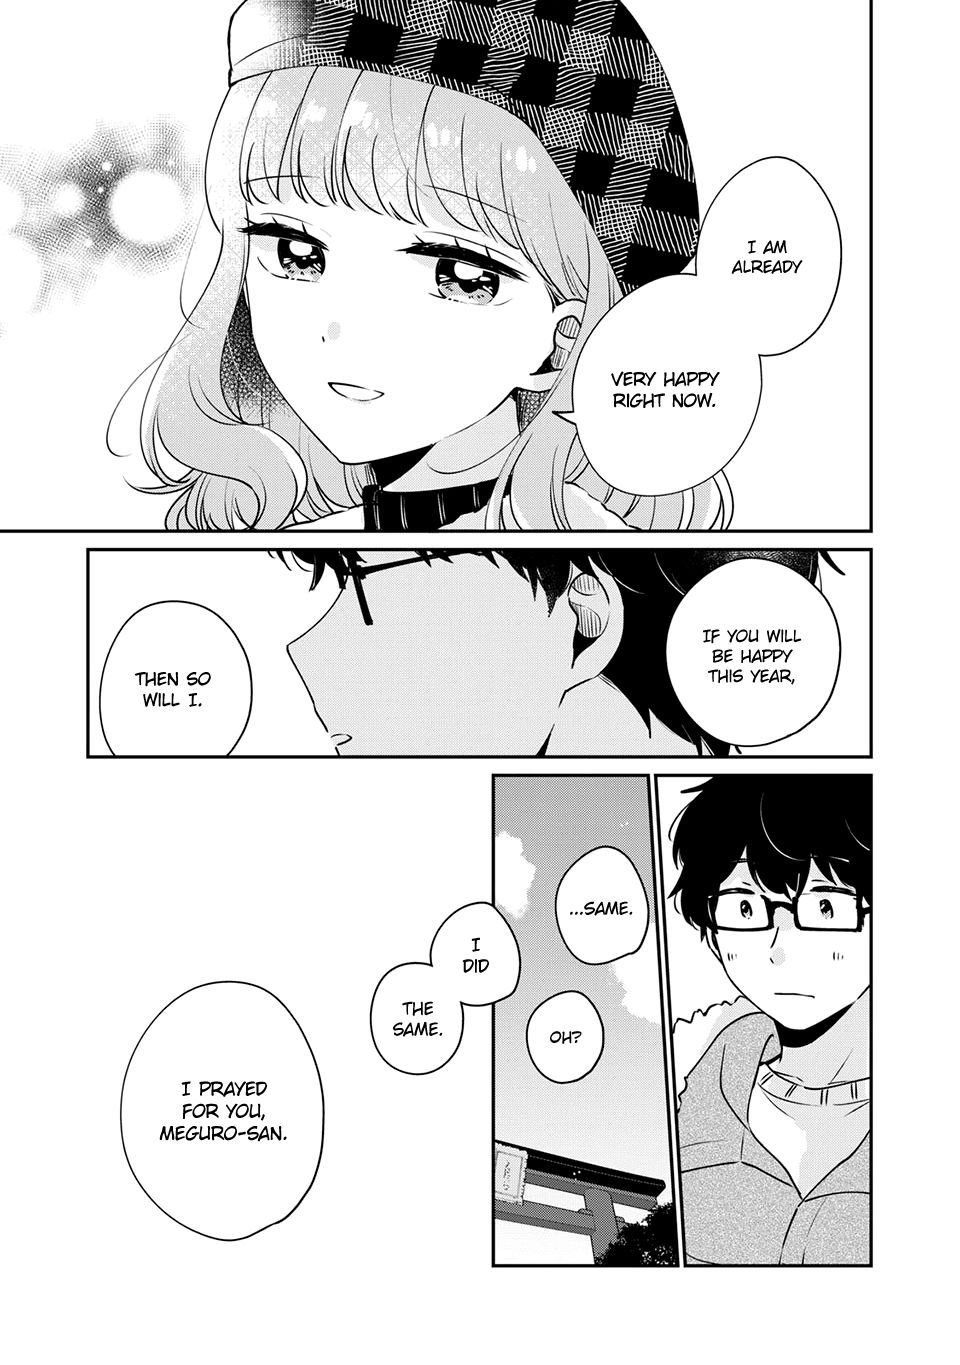 It's Not Meguro-san's First Time chapter 39 page 12